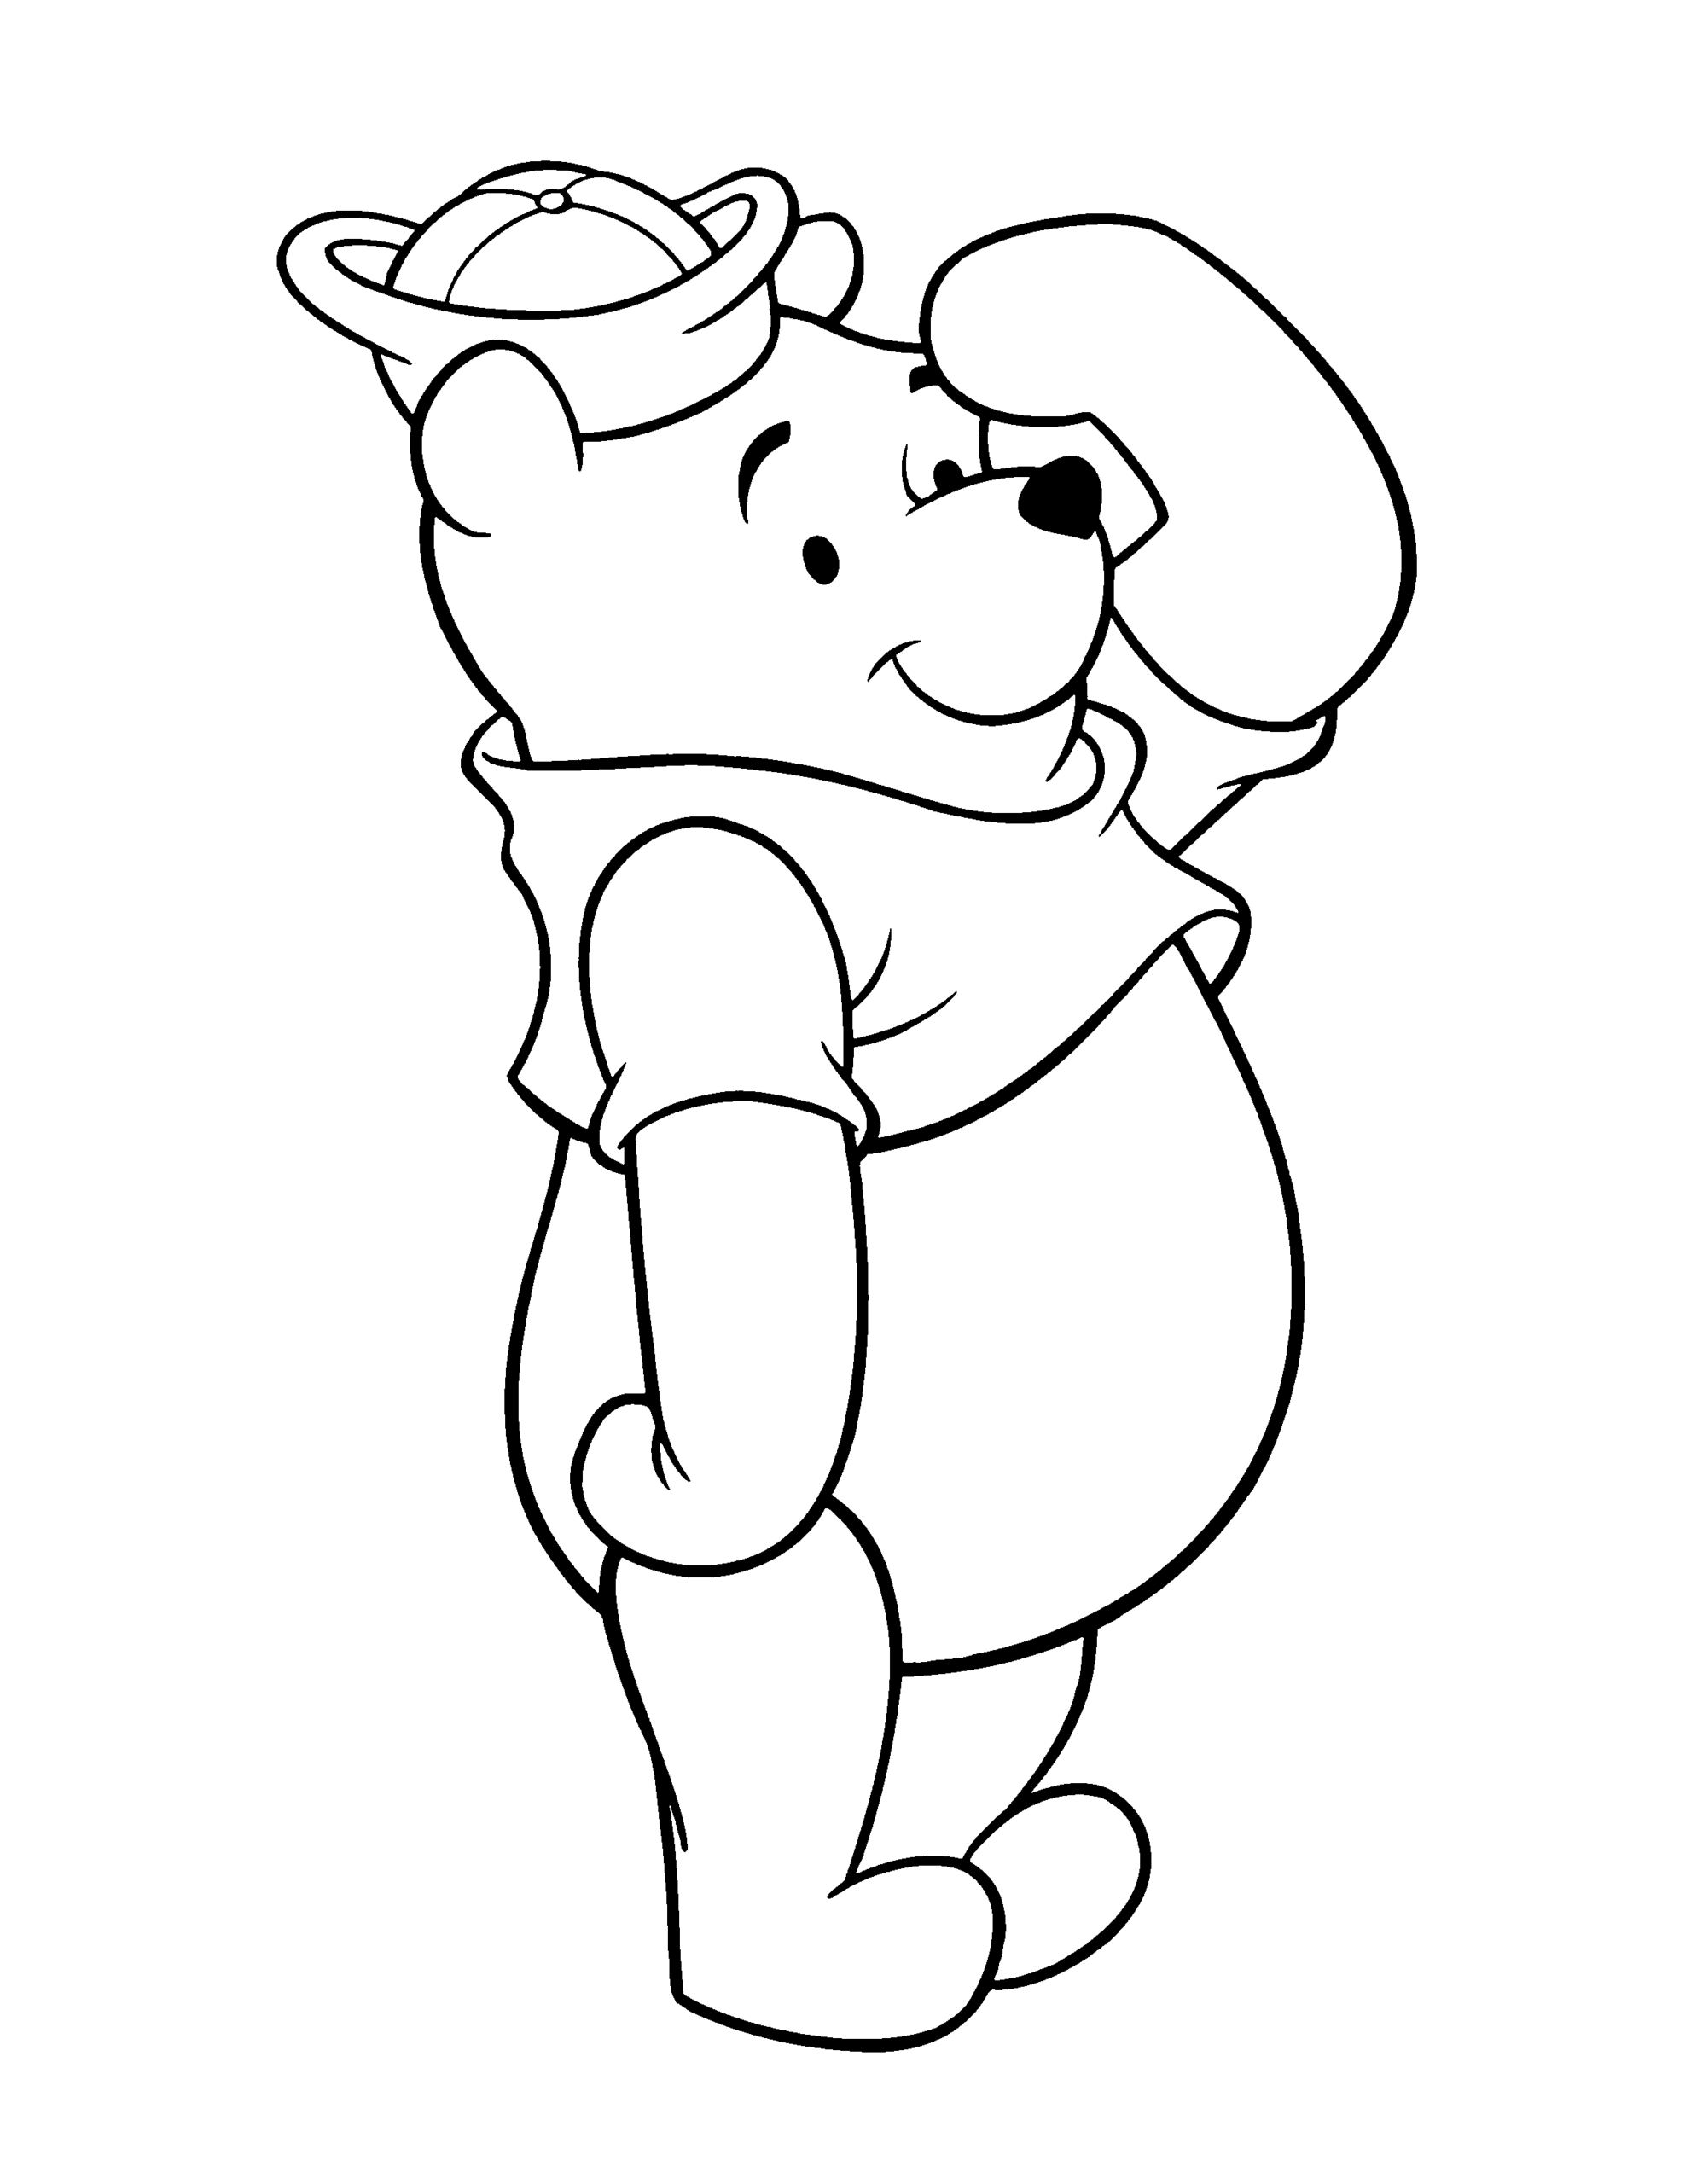 Winnie the Pooh Coloring Pages Cartoons winnie the pooh 95 Printable 2020 7218 Coloring4free